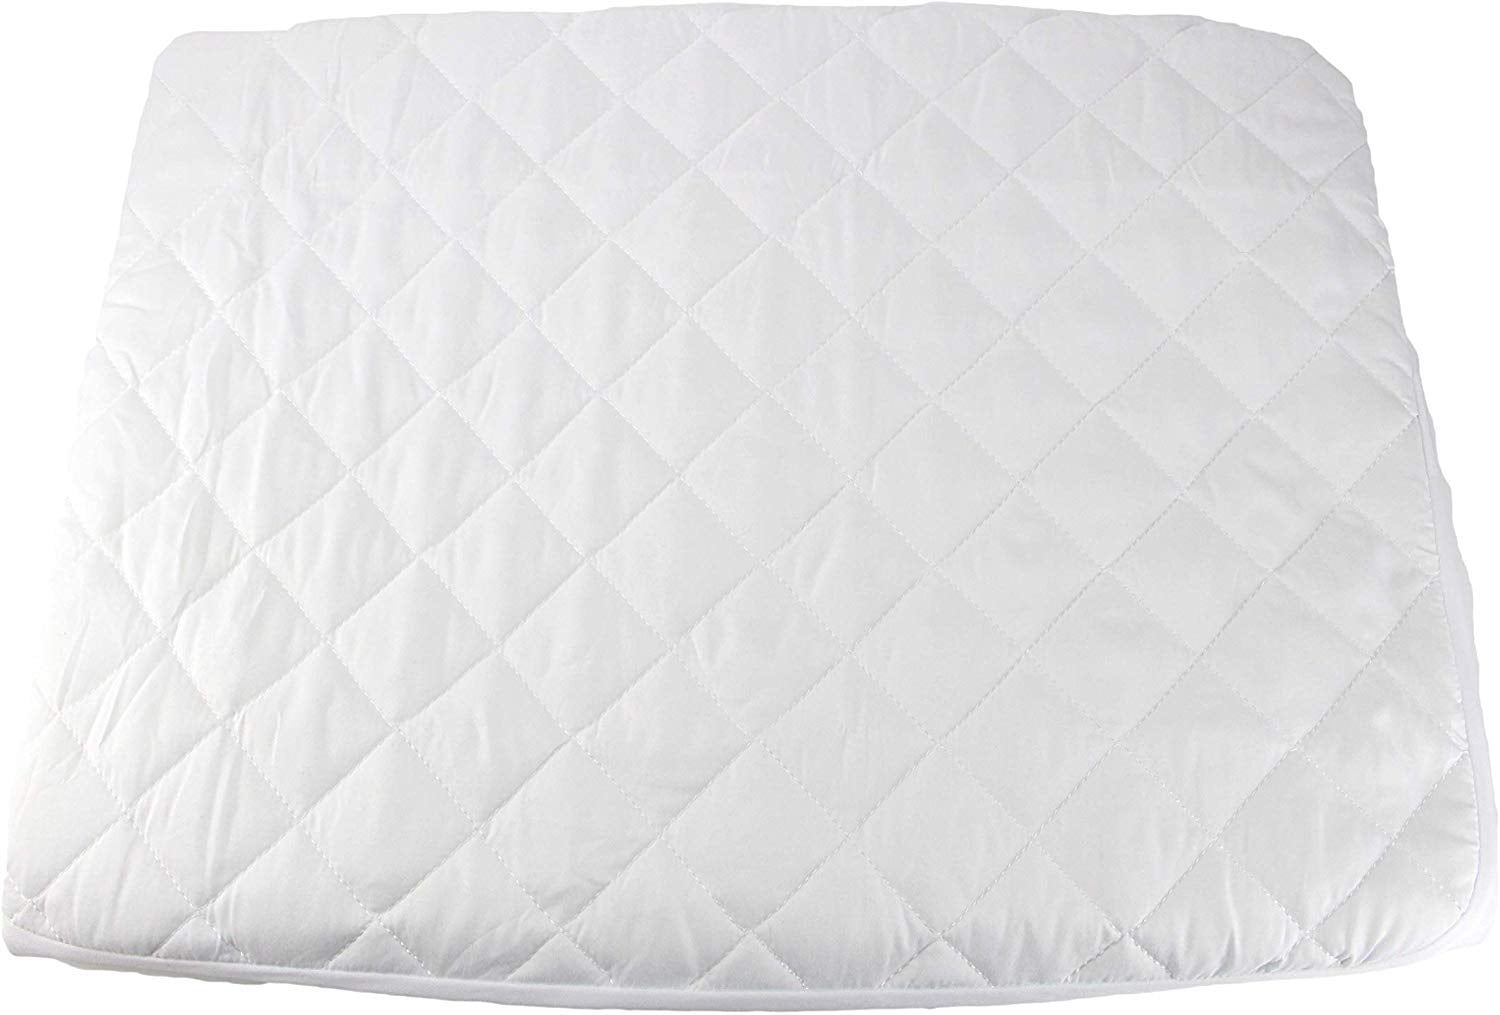 Midlee Quilted Waterproof Dog Bed Cover - Mattress Protector for Pee (37